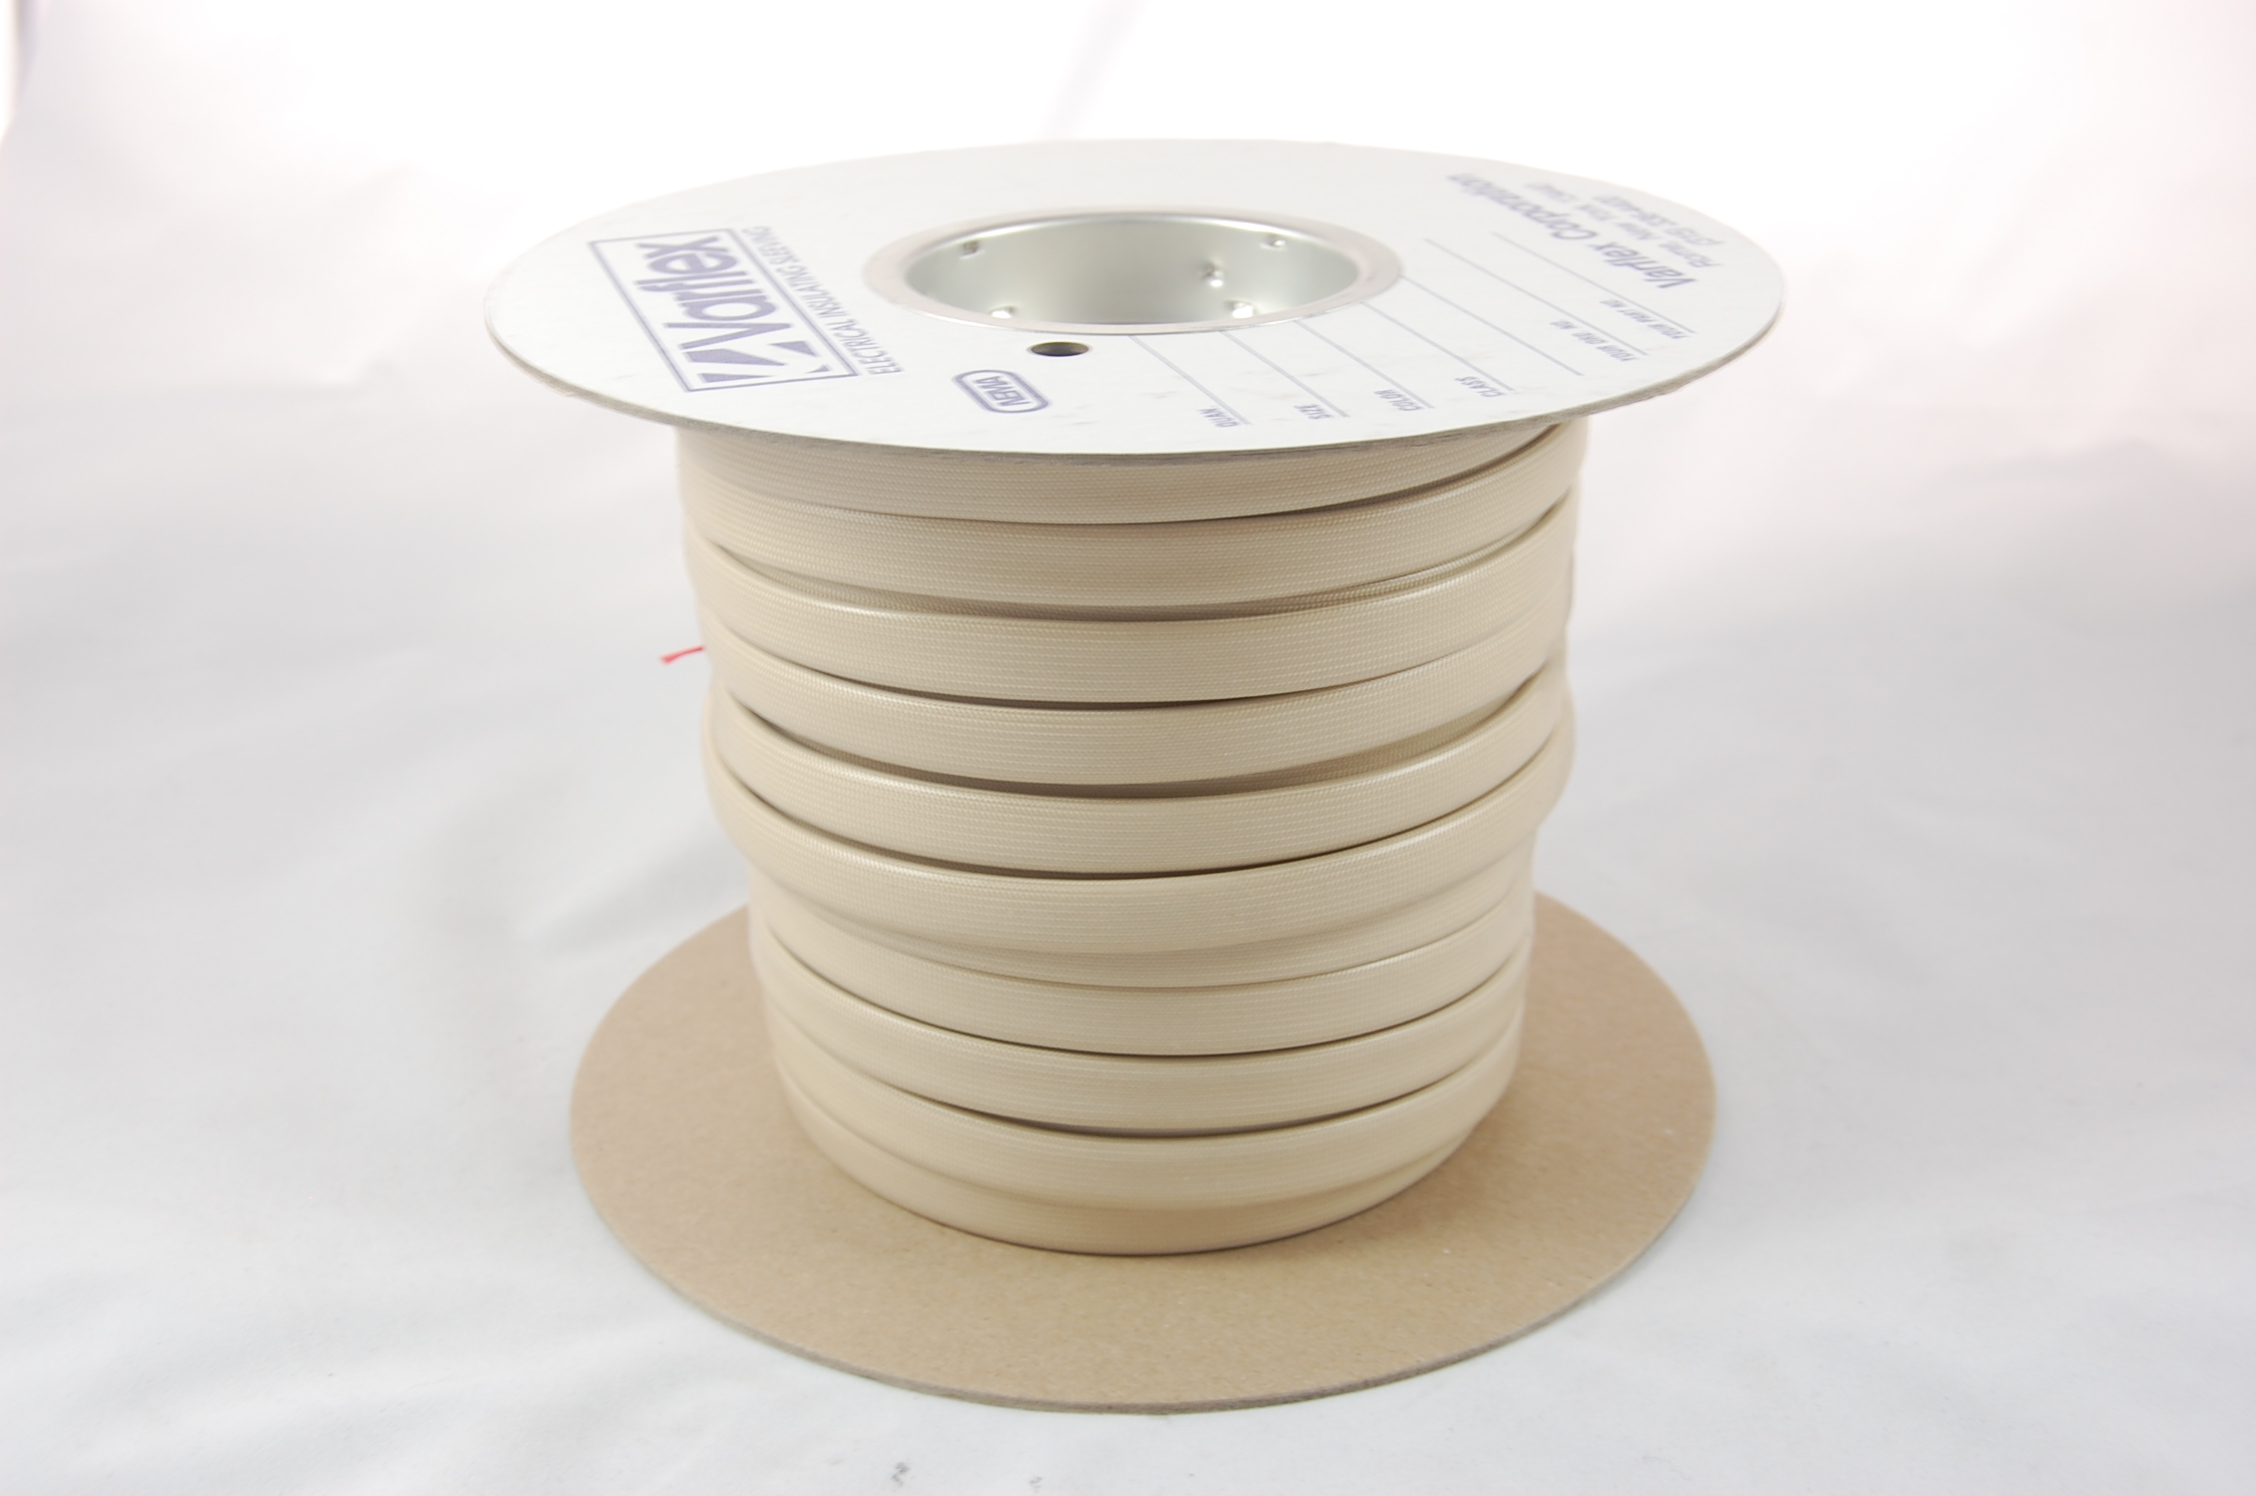 #15 AWG Varglas Silicone Rubber Grade H-A-1 (8000V) High Temperature Silicone Rubber Coated Braided Fiberglass Sleeving 200°C, natural, 500 FT per spool